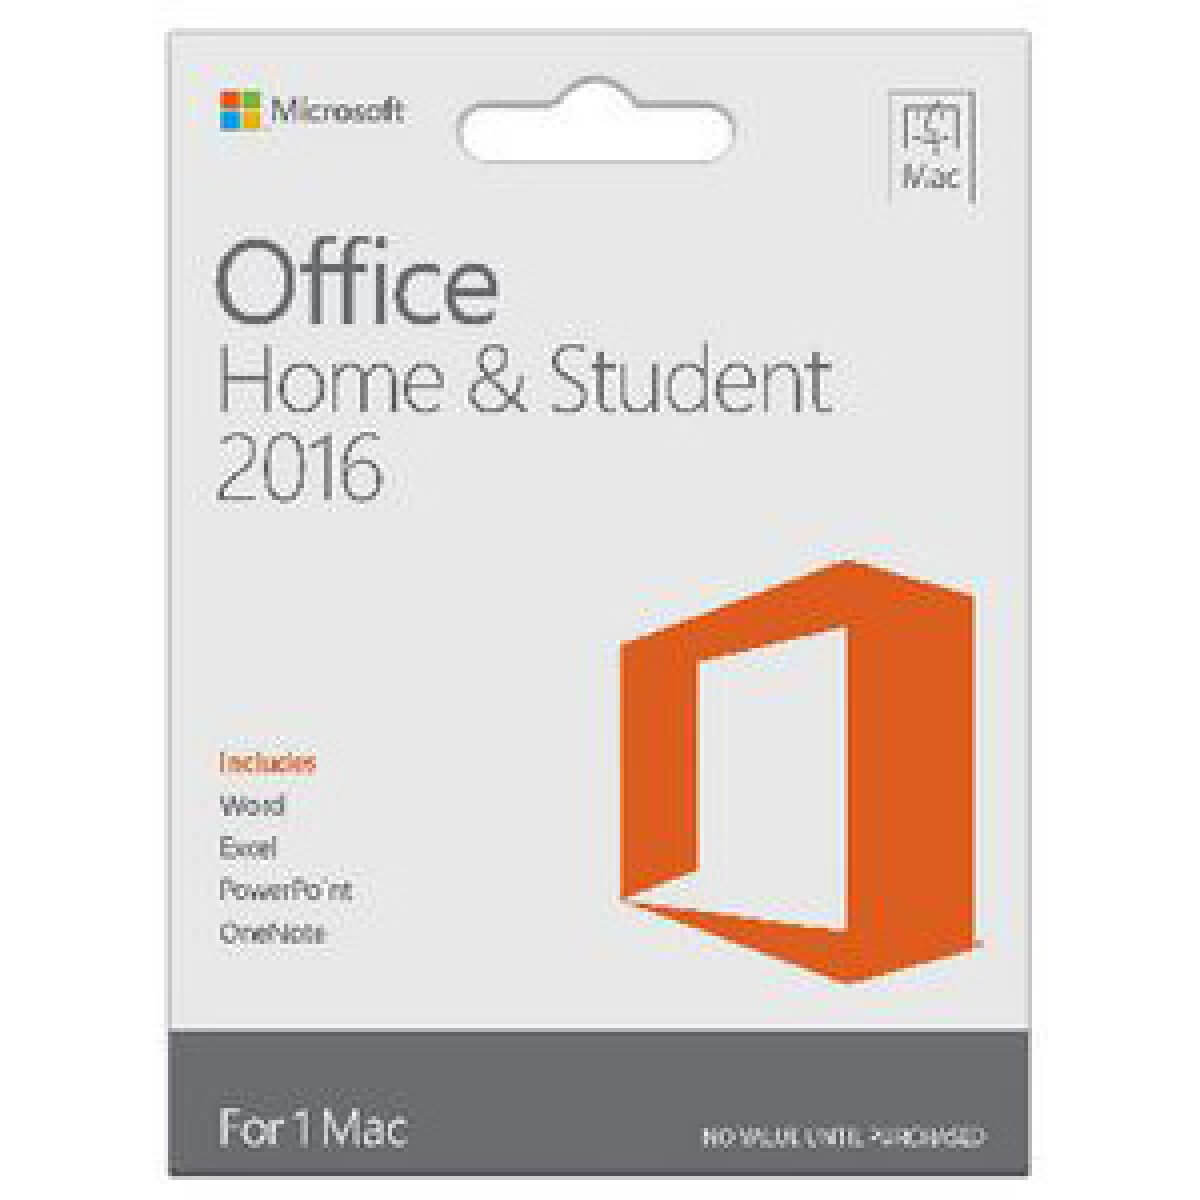 microsoft office 2008 home and student edition for mac